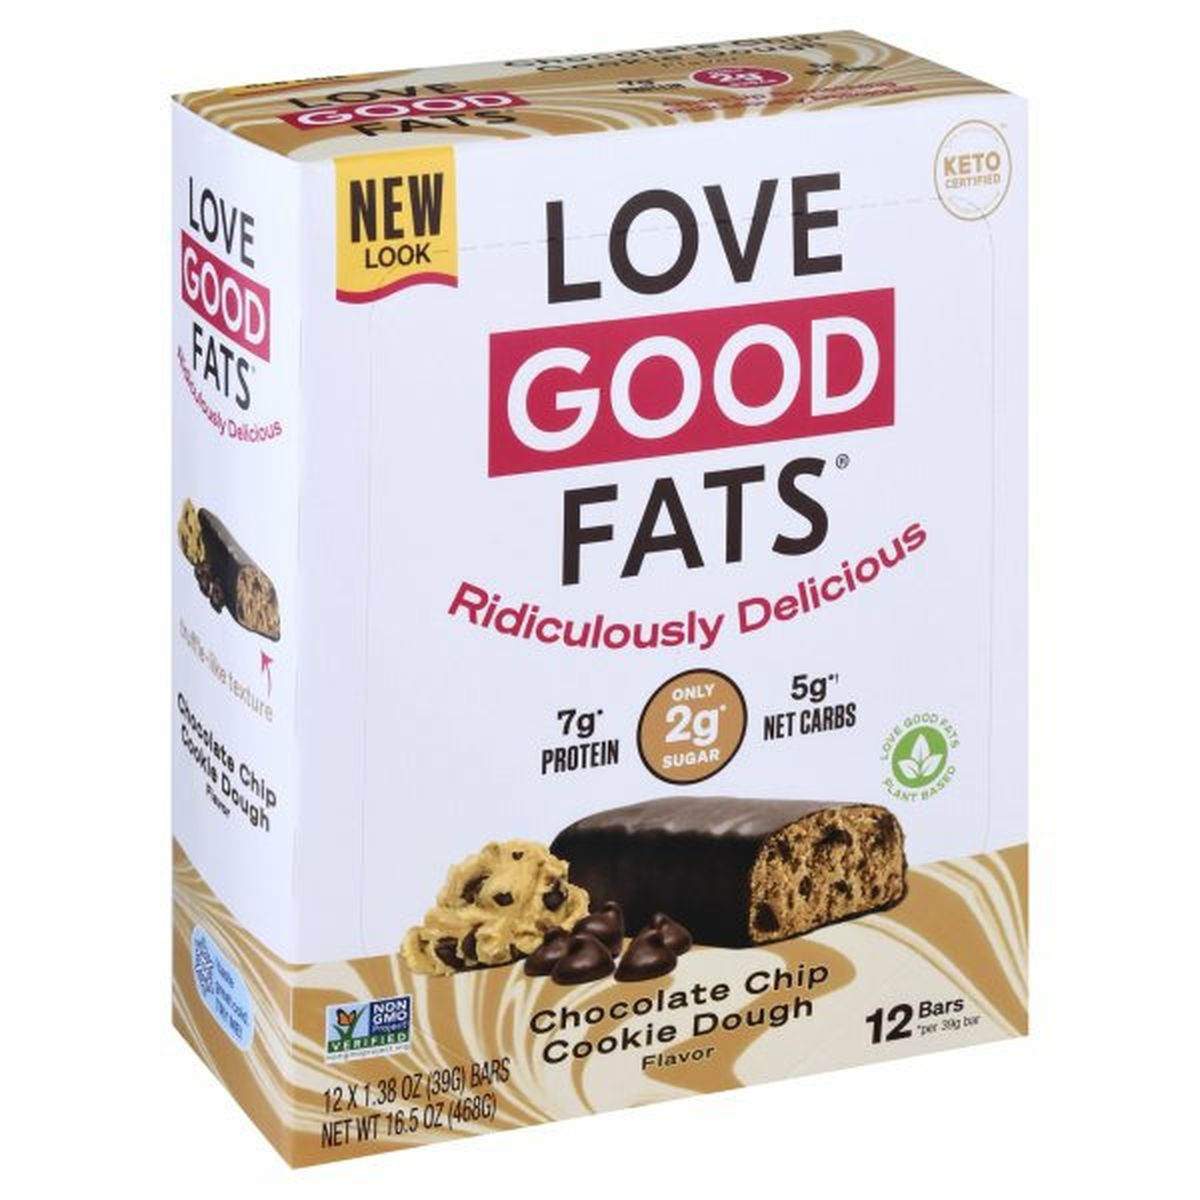 Calories in Love Good Fats Bars, Chocolate Chip Cookie Dough Flavor, 12 Pack